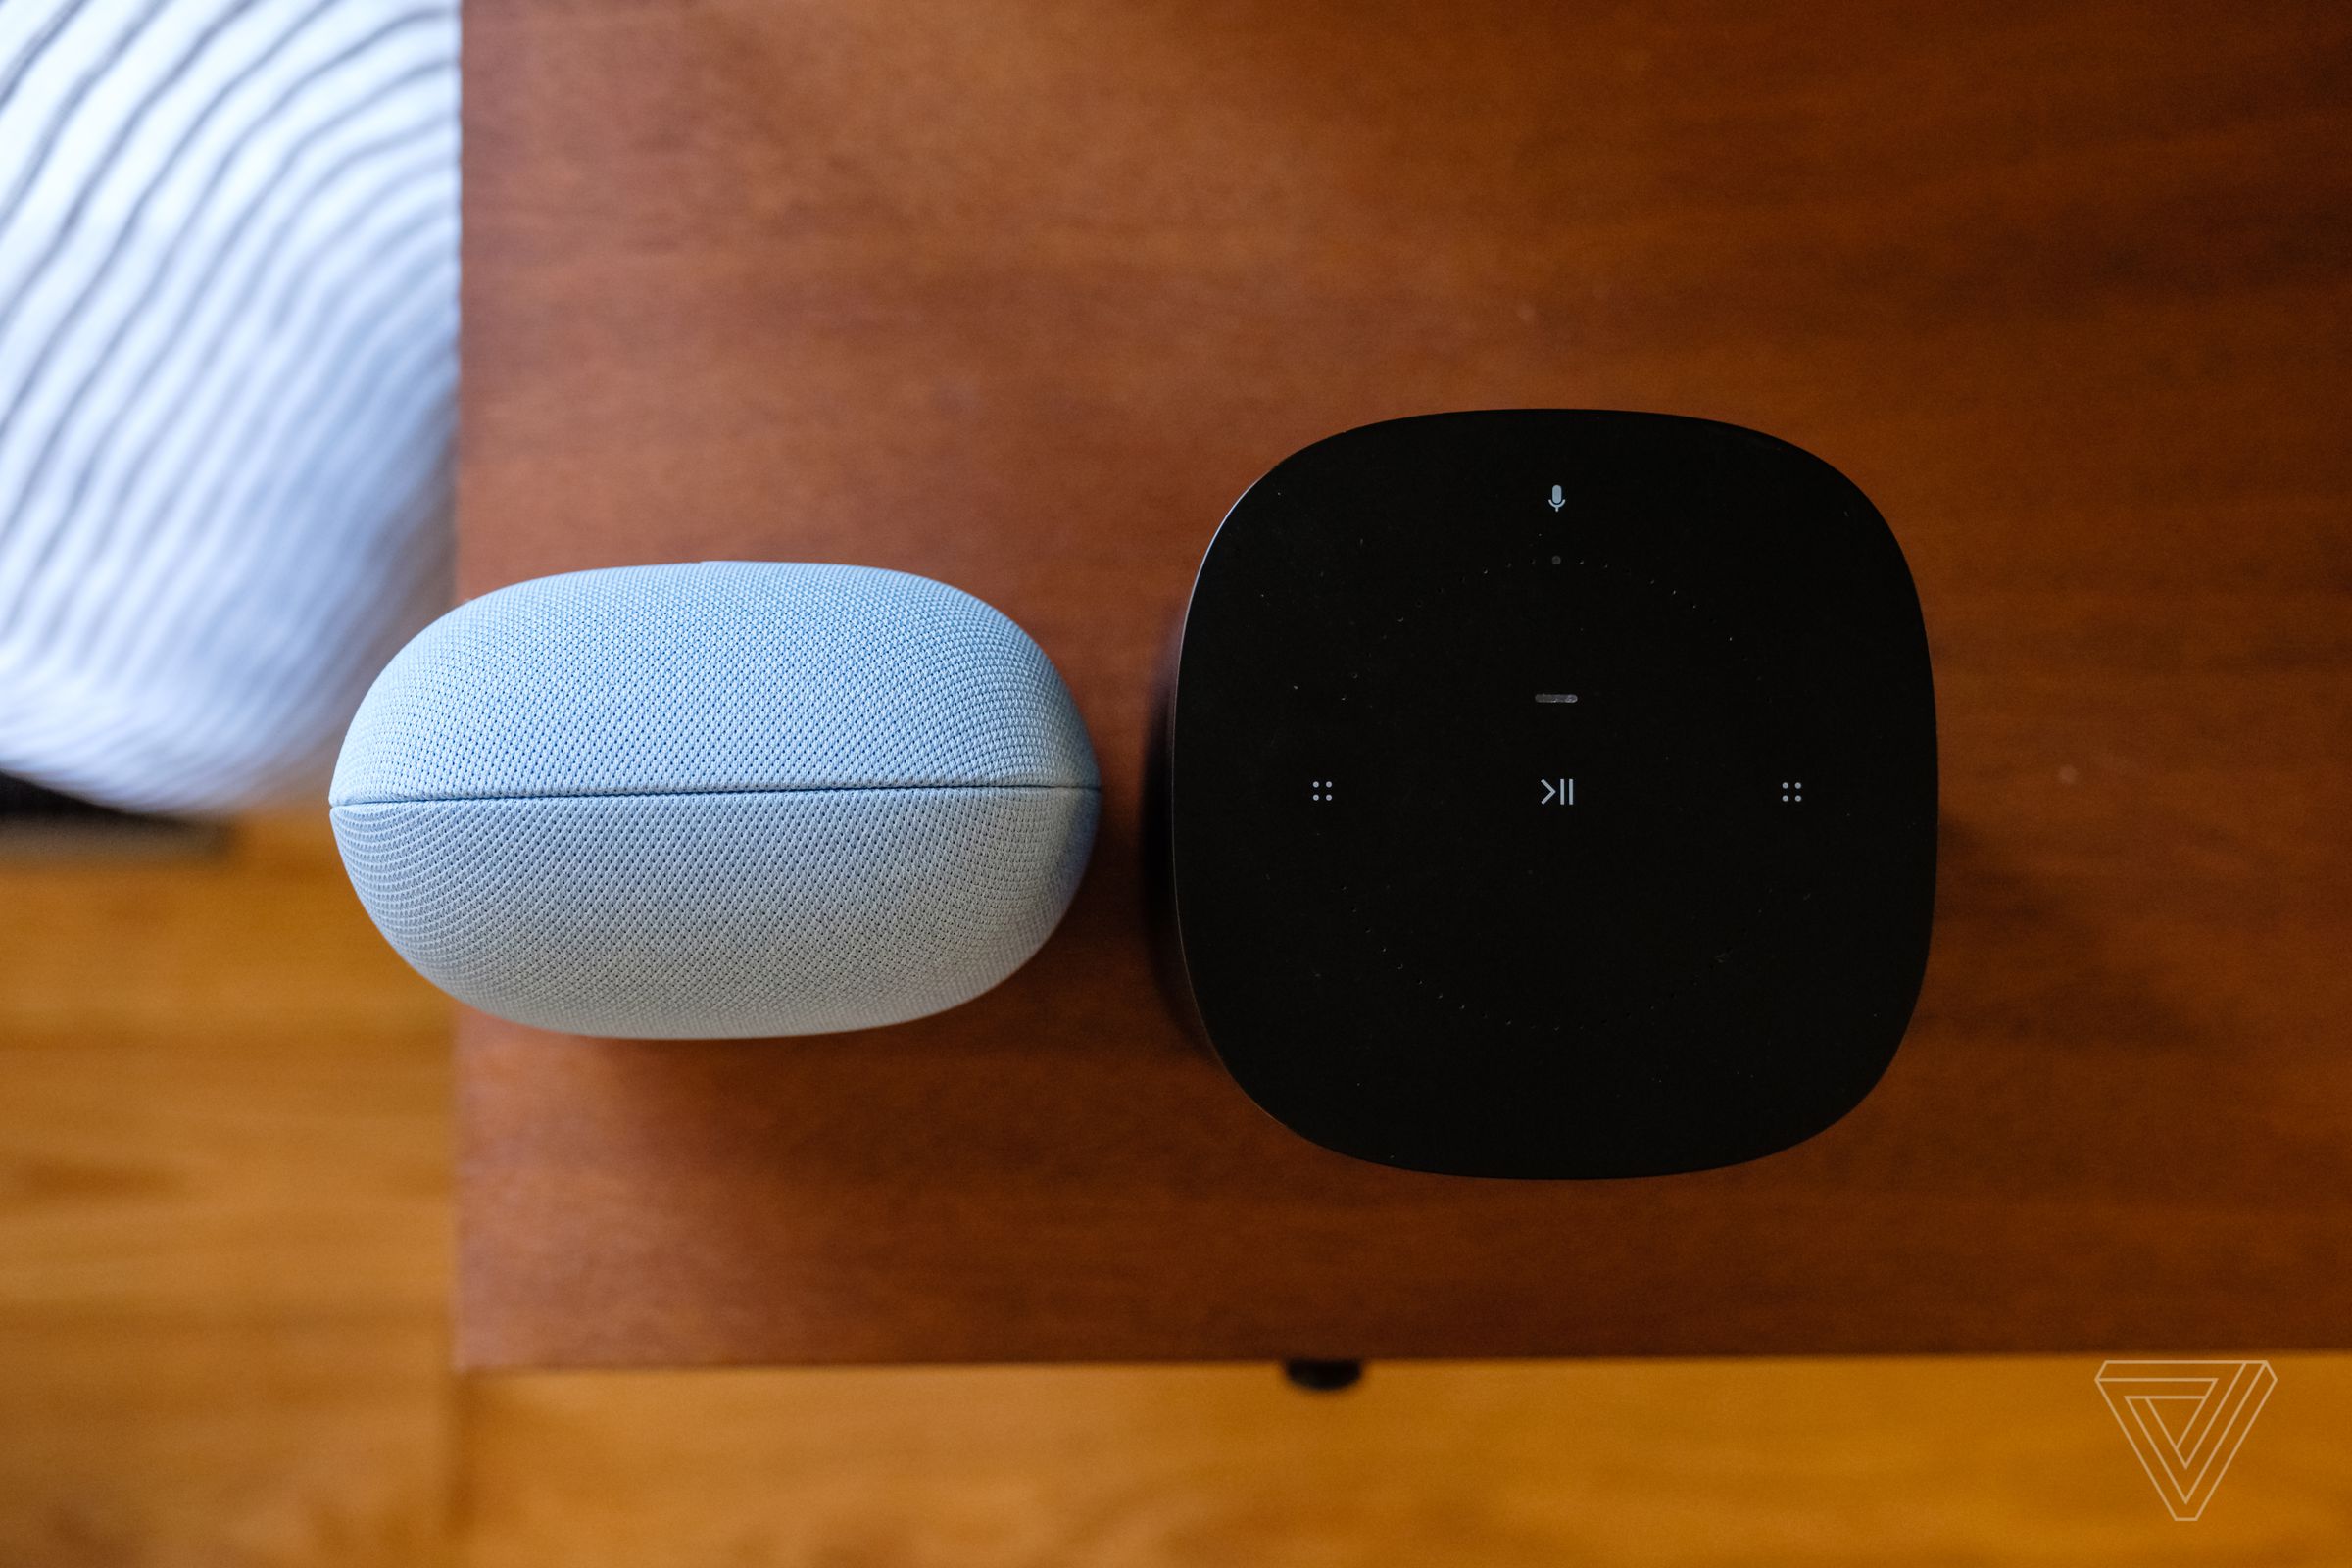 Despite its height, the Nest Audio has less depth than the Sonos One and less punch as a result.